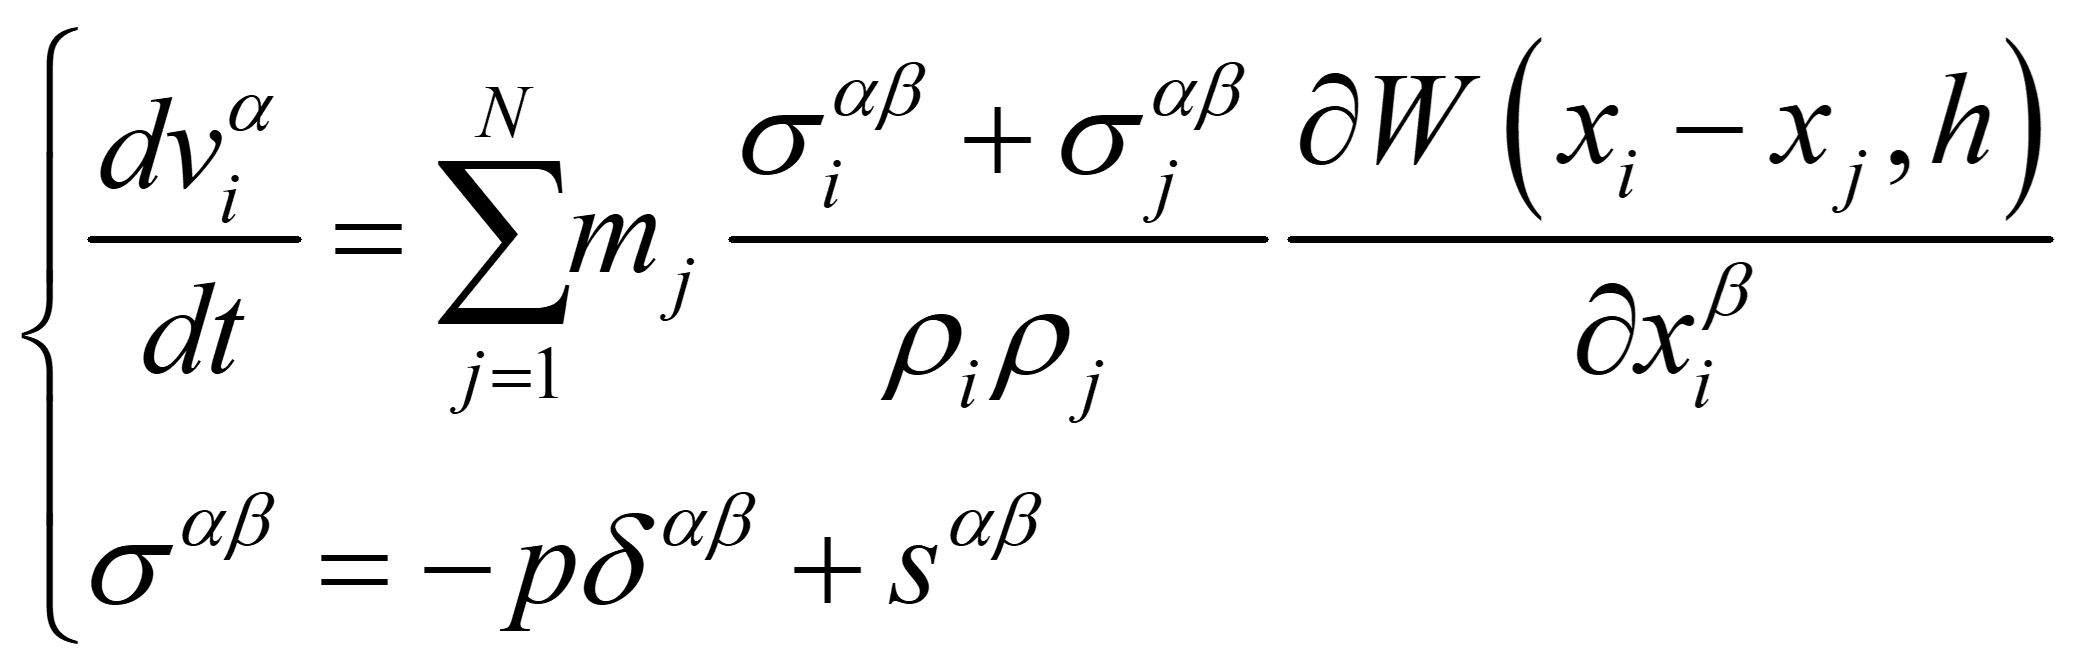 Particle approximation of momentum